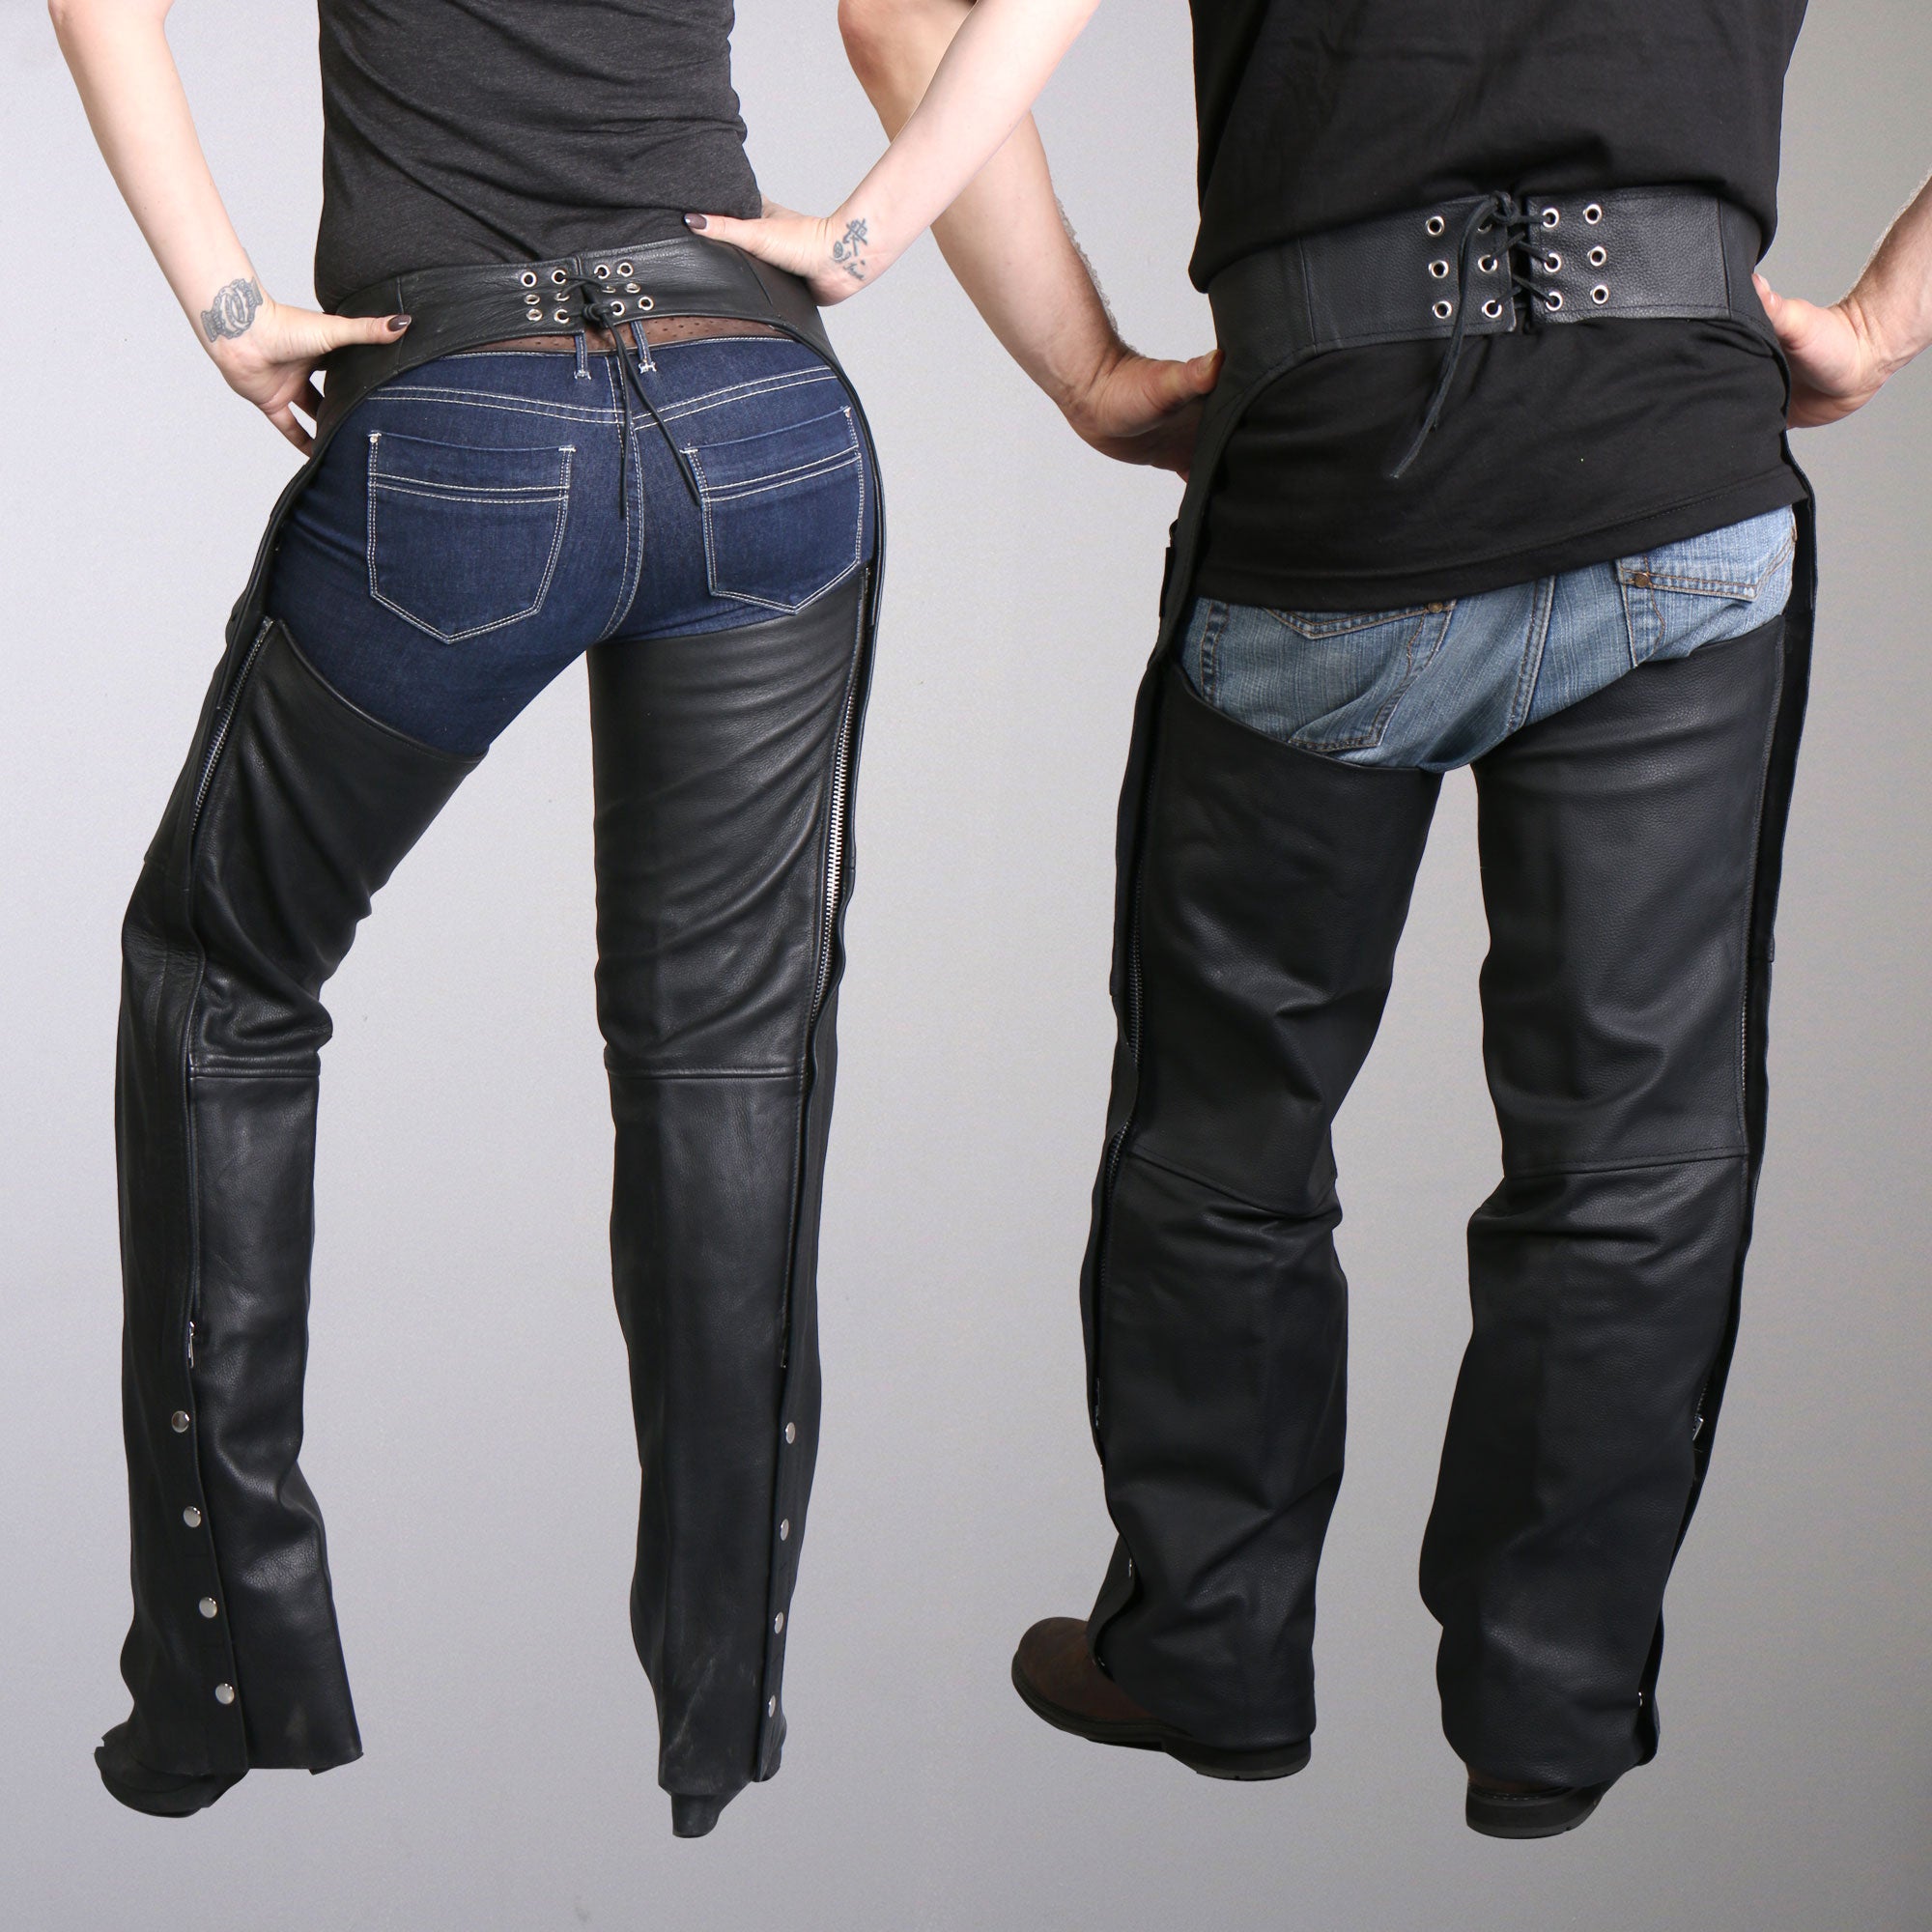 Hot Leathers CHM1001 Best Selling Black Fully Lined Unisex motorcycle